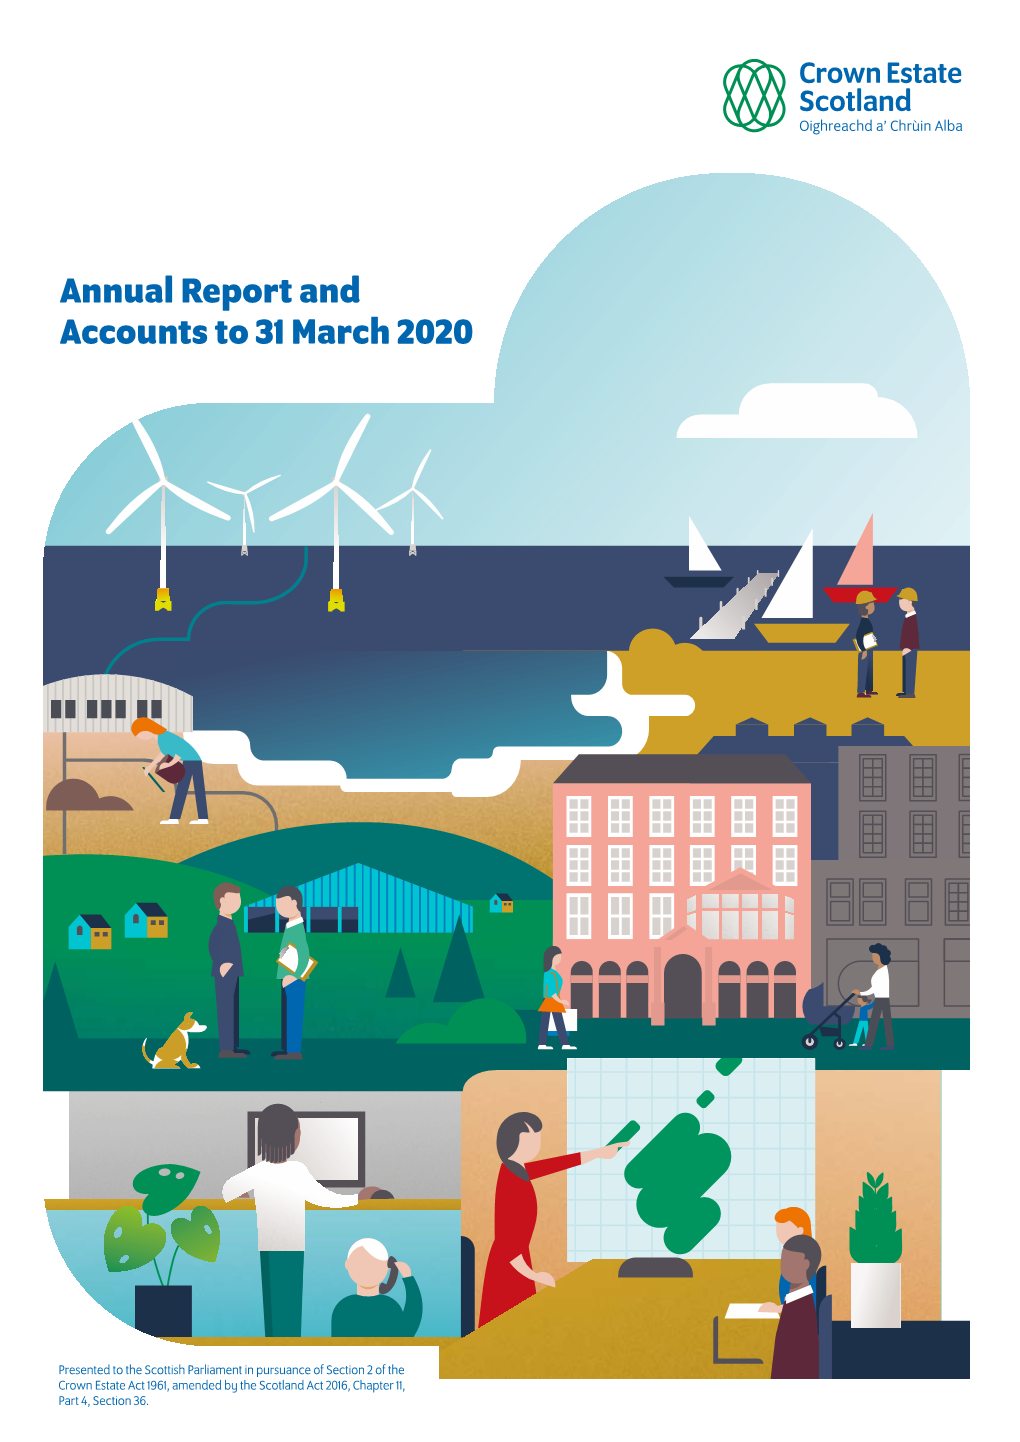 Annual Report and Accounts to 31 March 2020